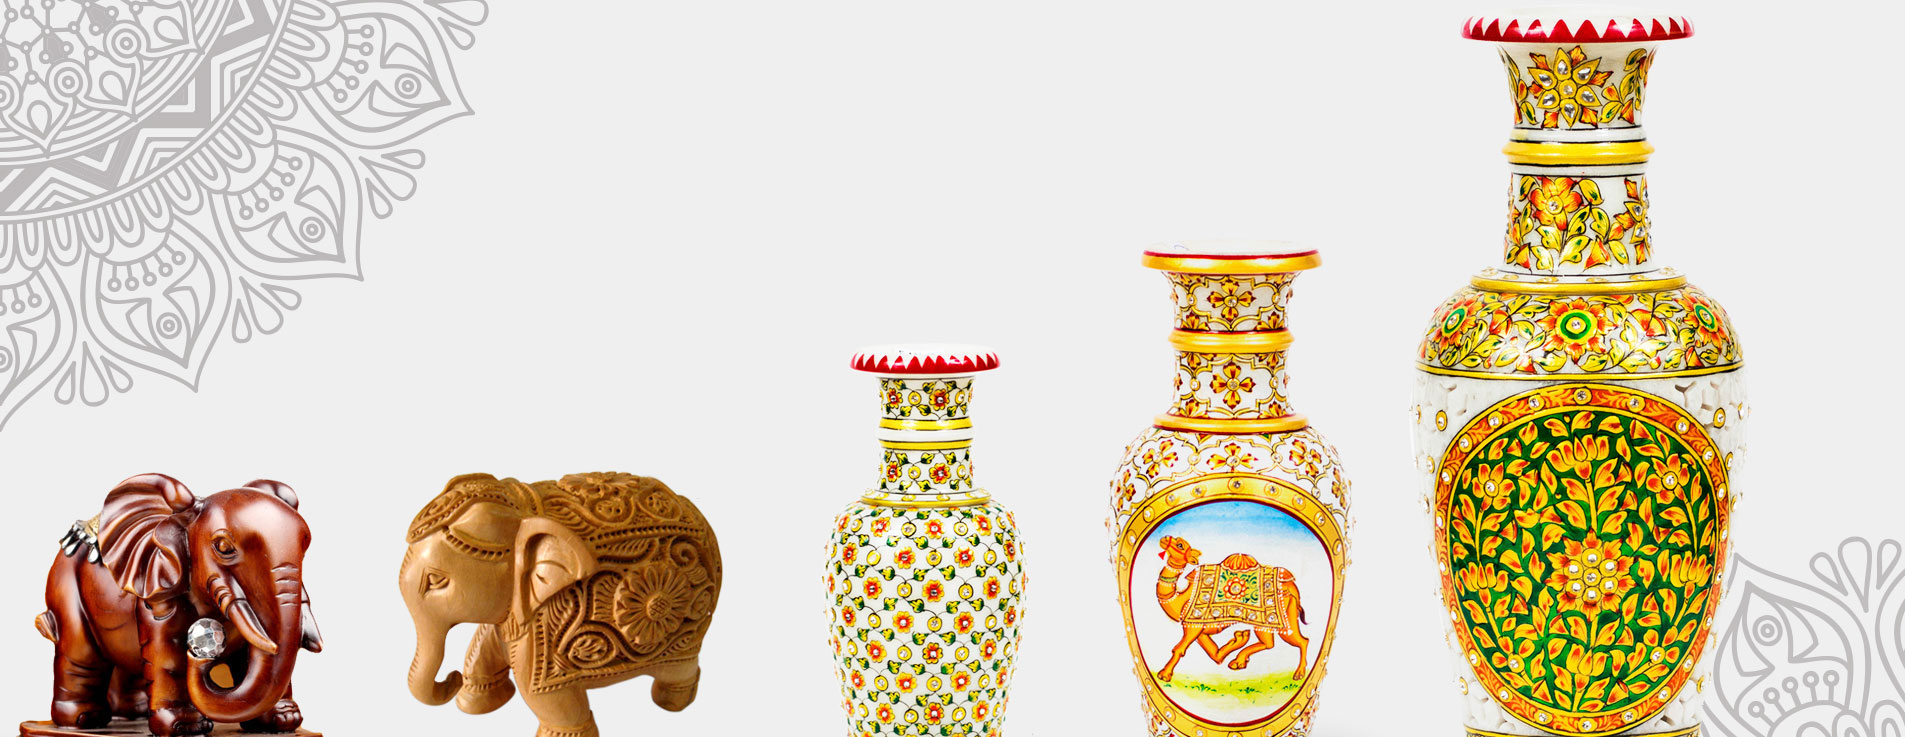 5 Best online site to sell Handmade decorative products in India